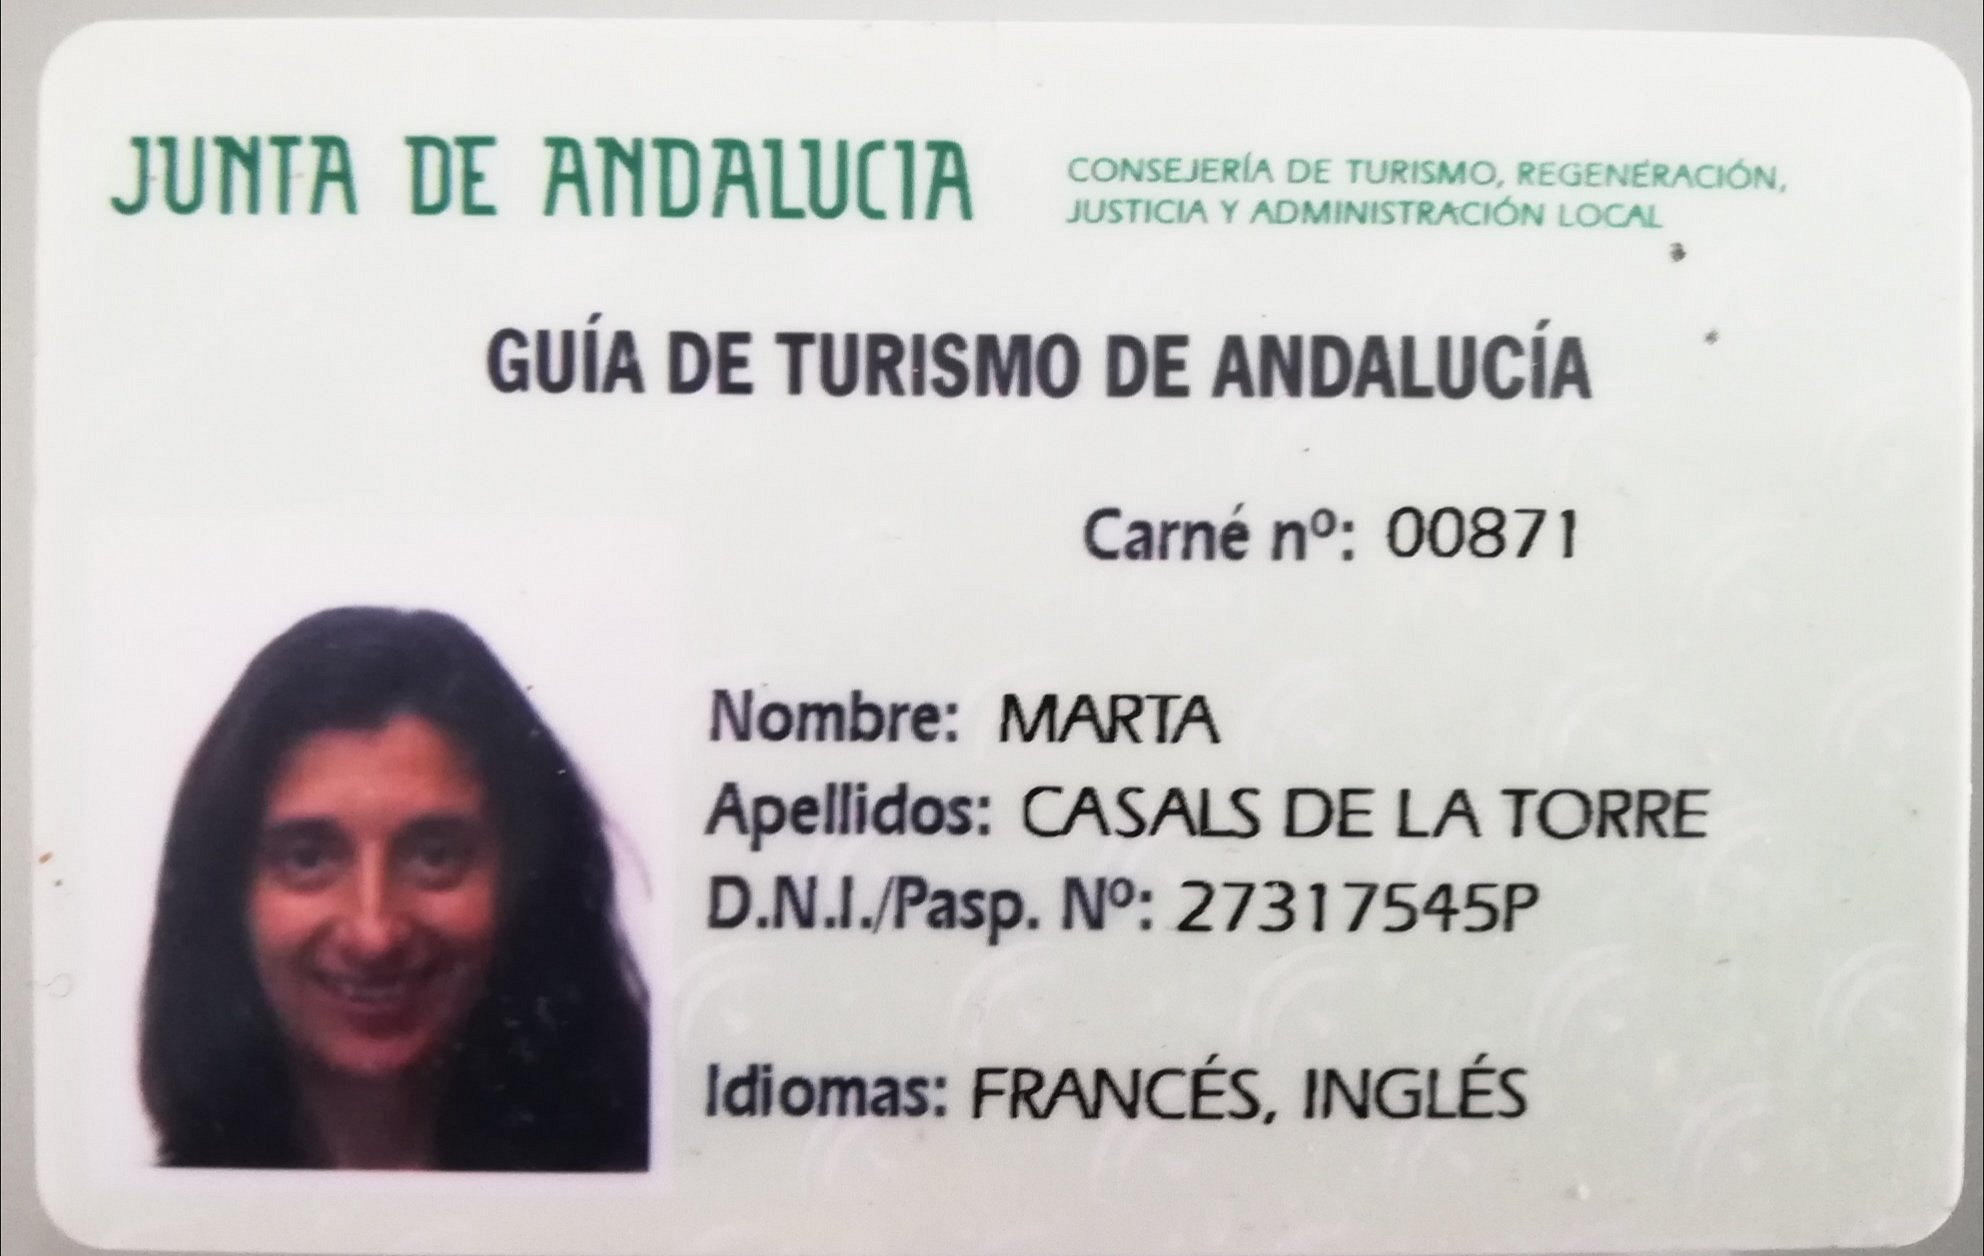 tour guide license in spain